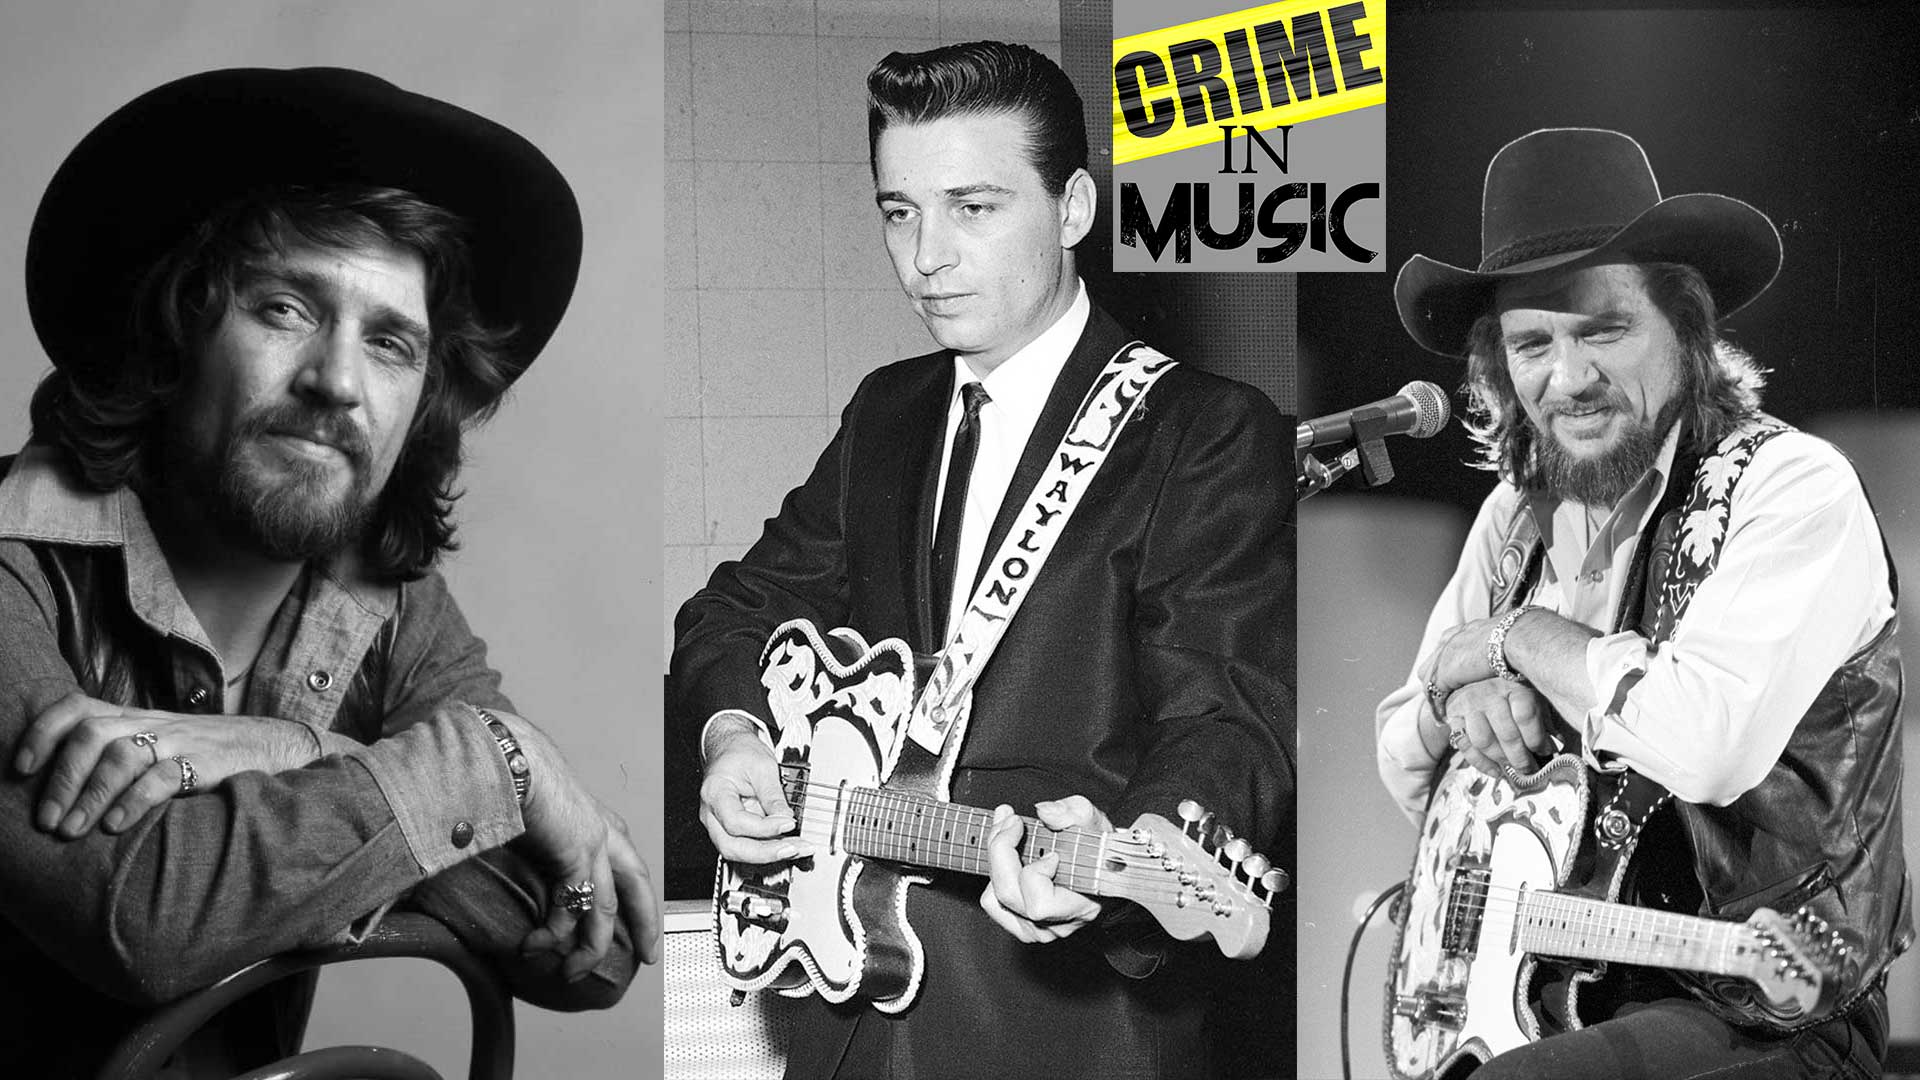 photo collage of Waylon Jennings, Musician, Outlaw Country Icon